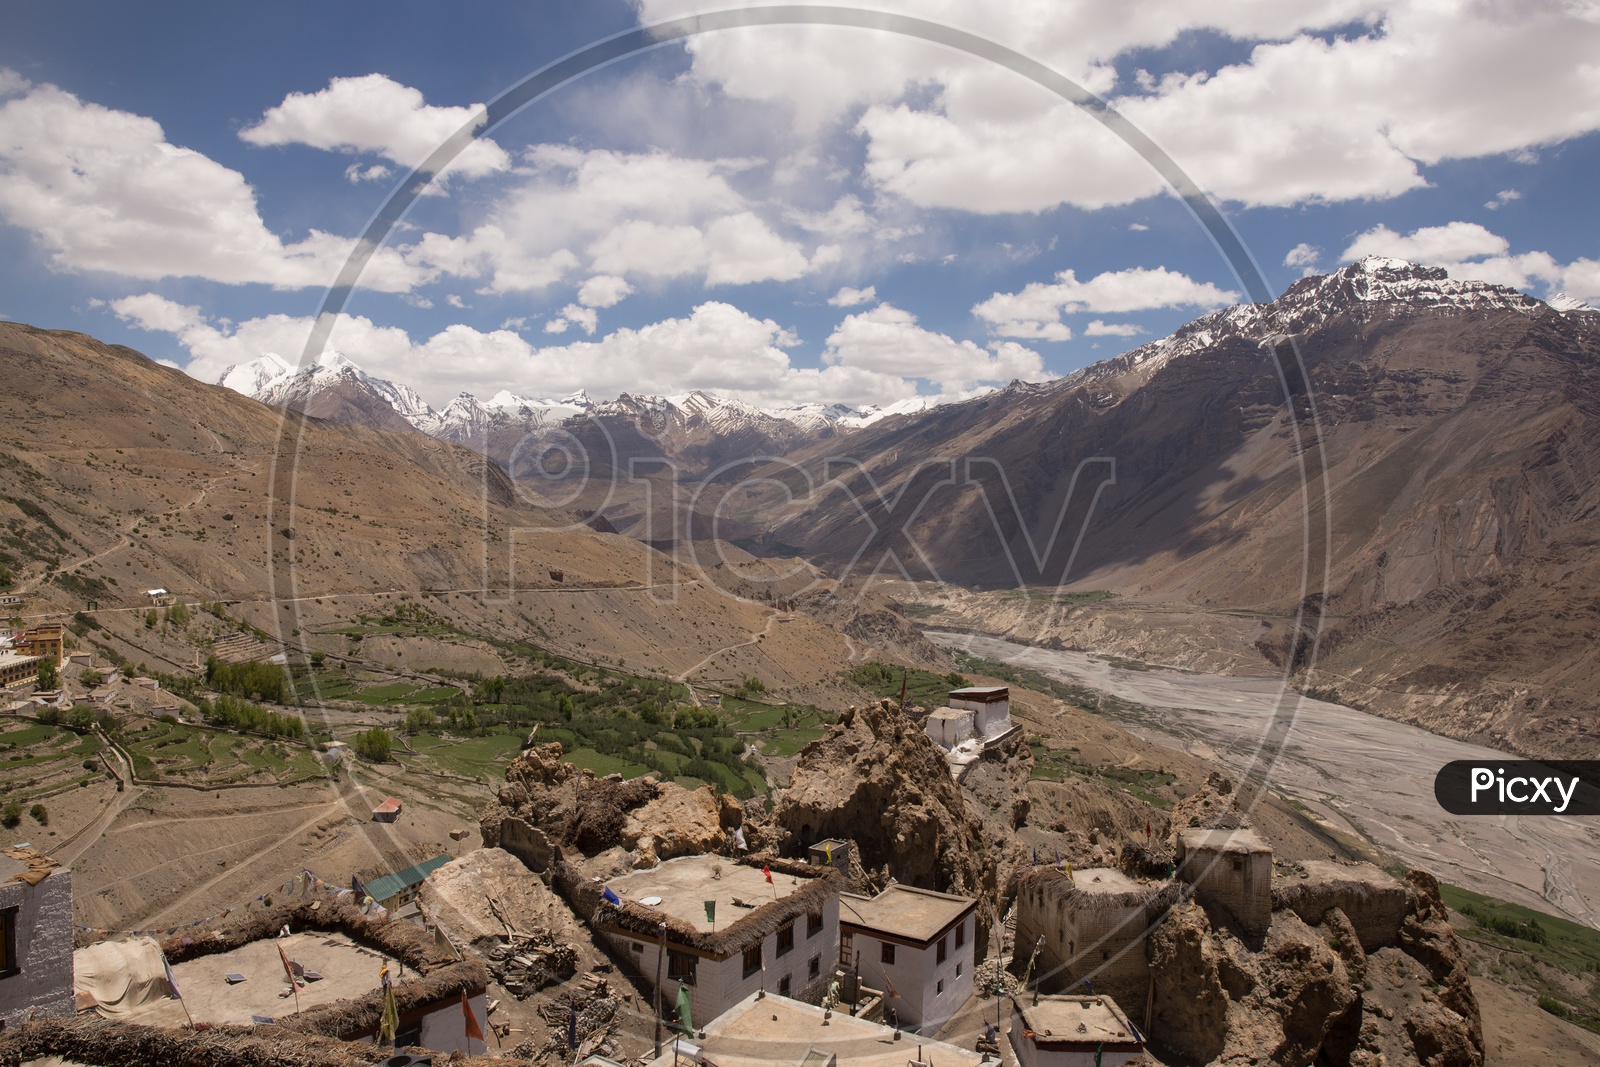 Landscape View Of Snow Capped Mountains And Sedimentary Hills From The Villages Of  Spiti Valley